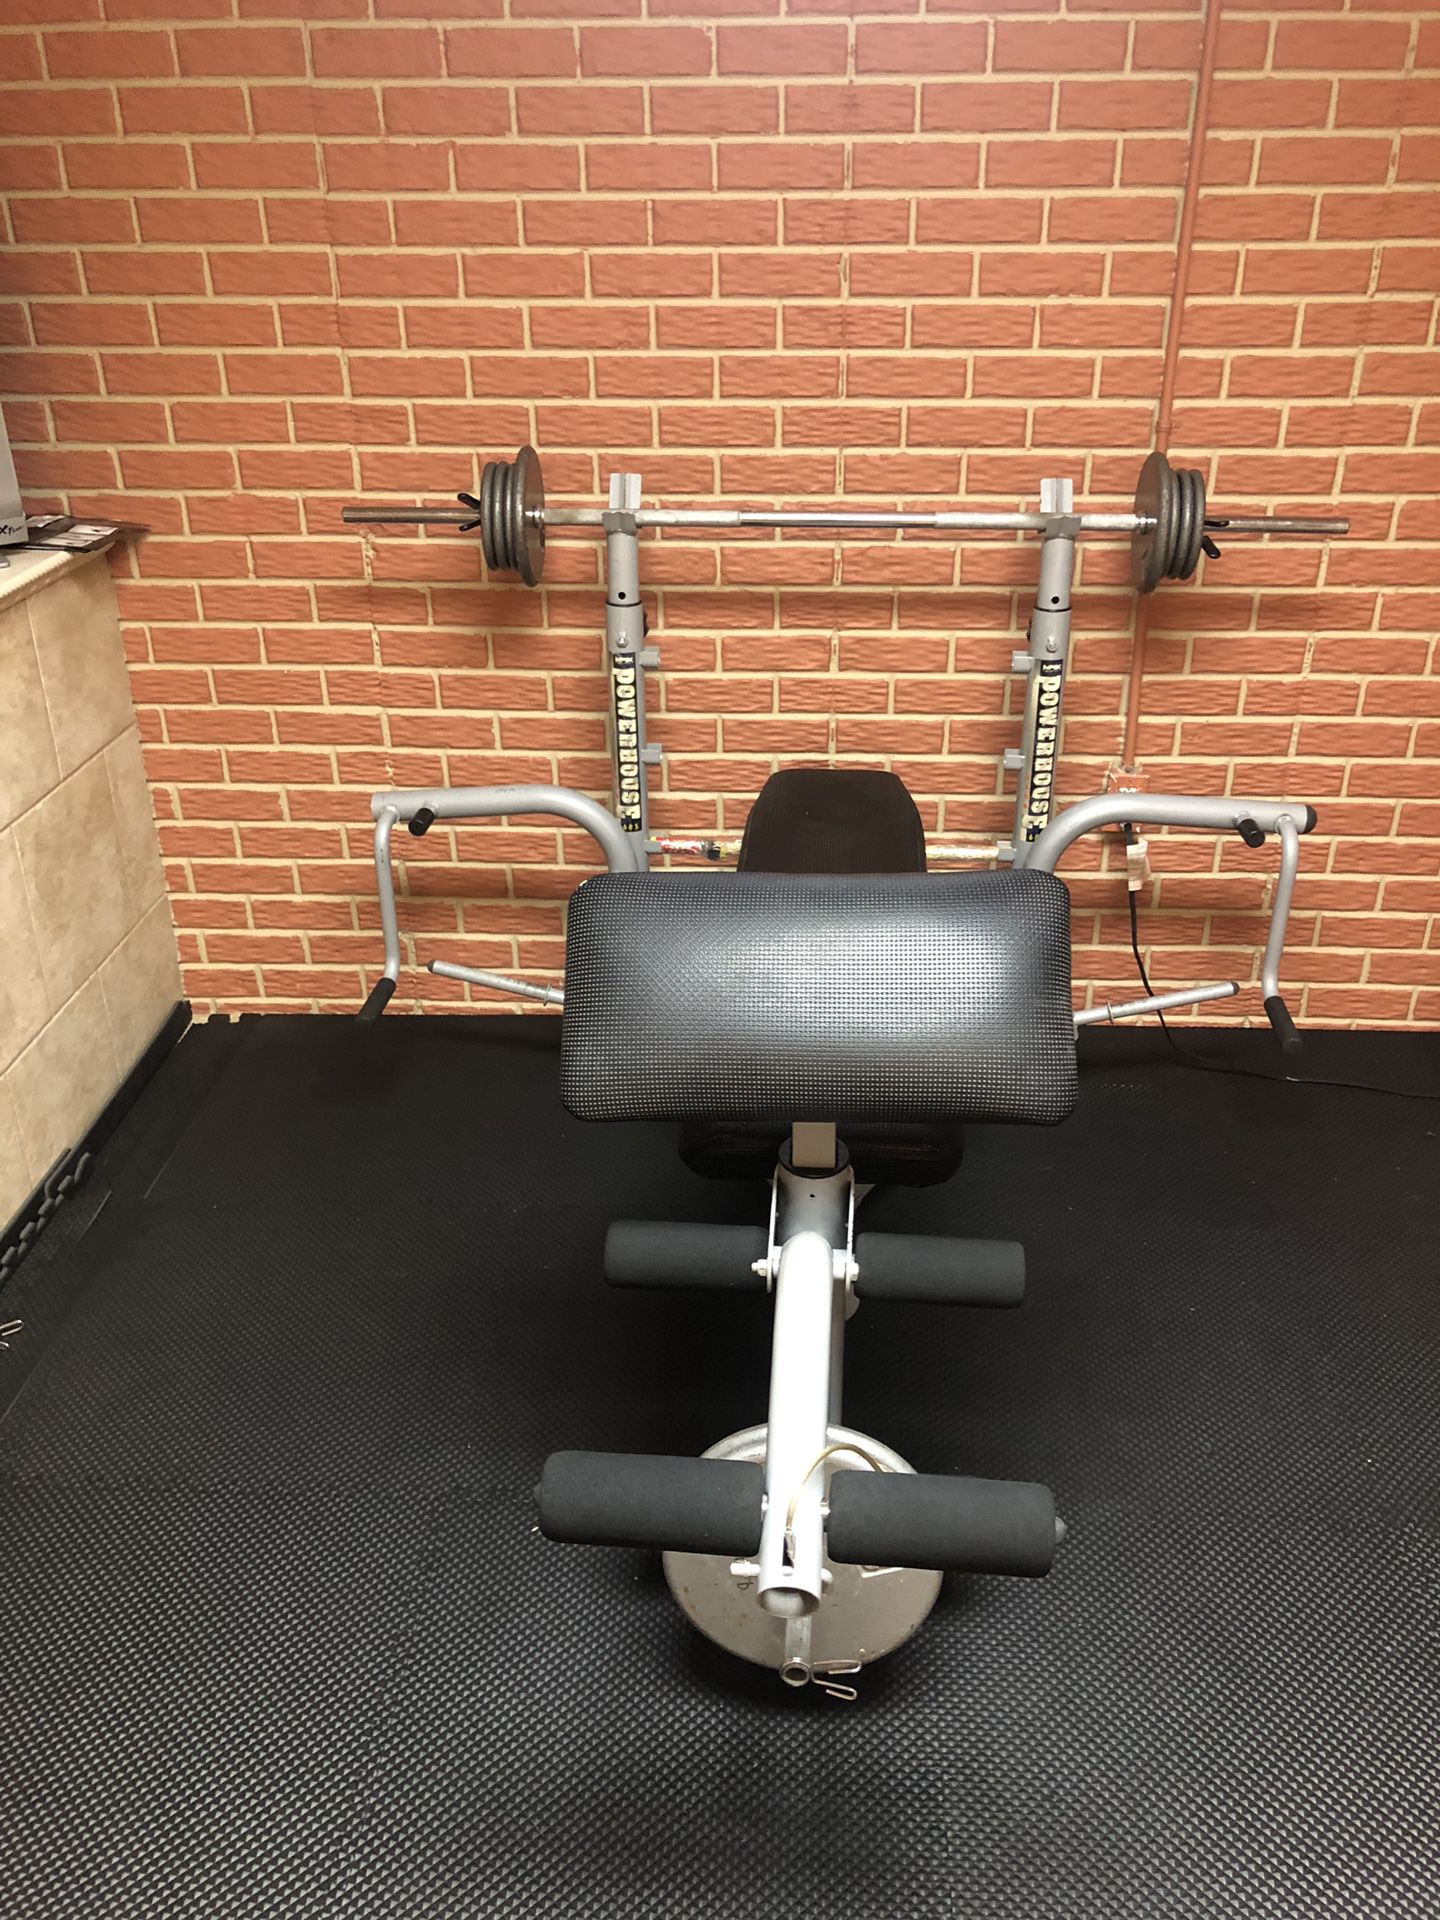 Powerhouse home gym with weights and bars